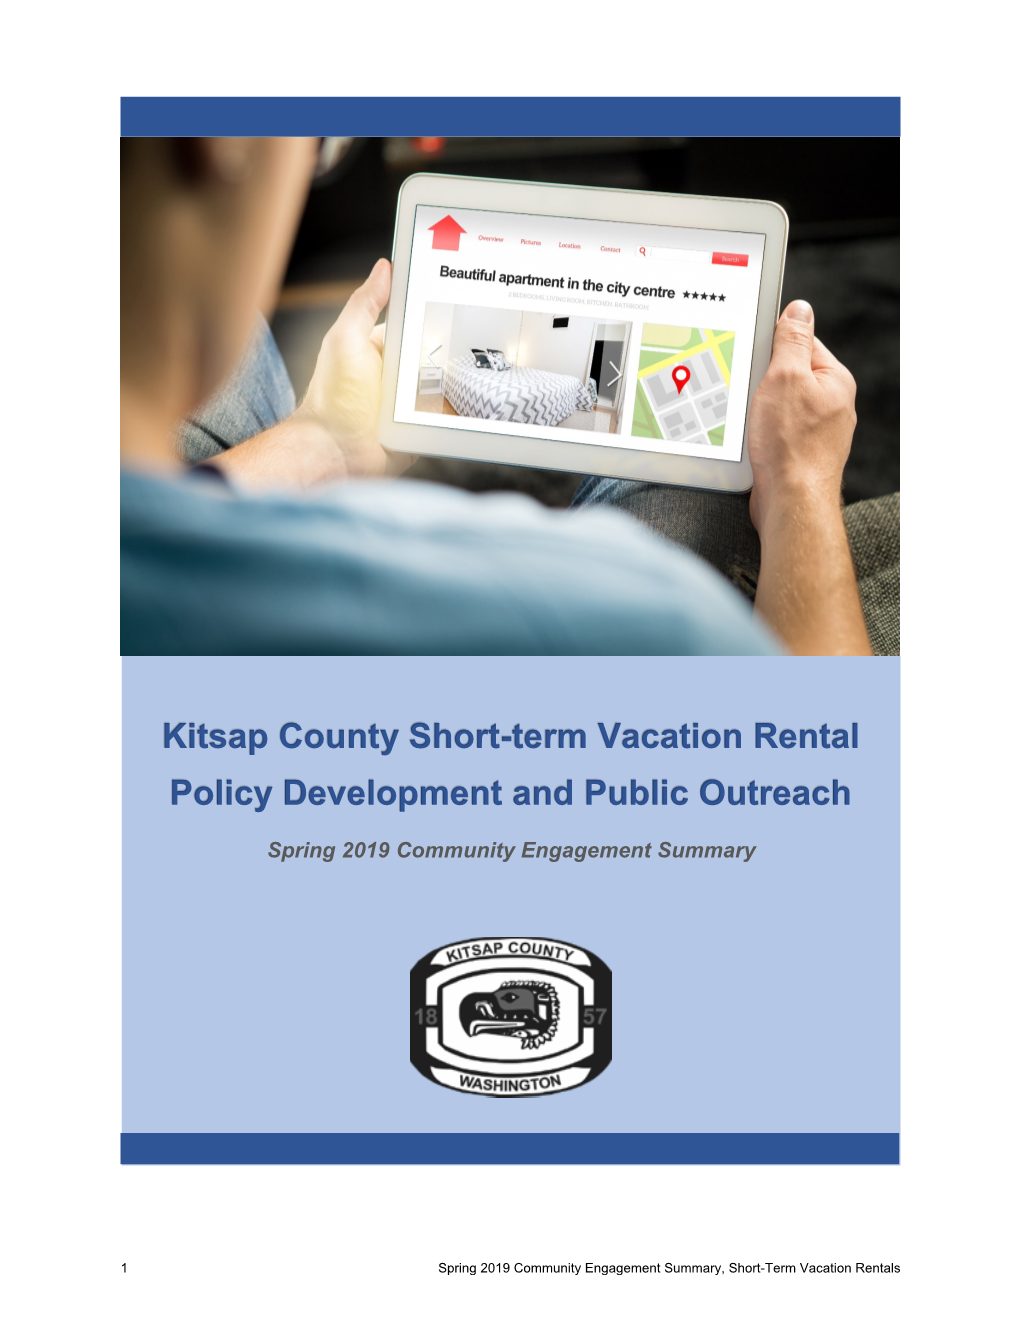 Kitsap County Short-Term Vacation Rental Policy Development and Public Outreach